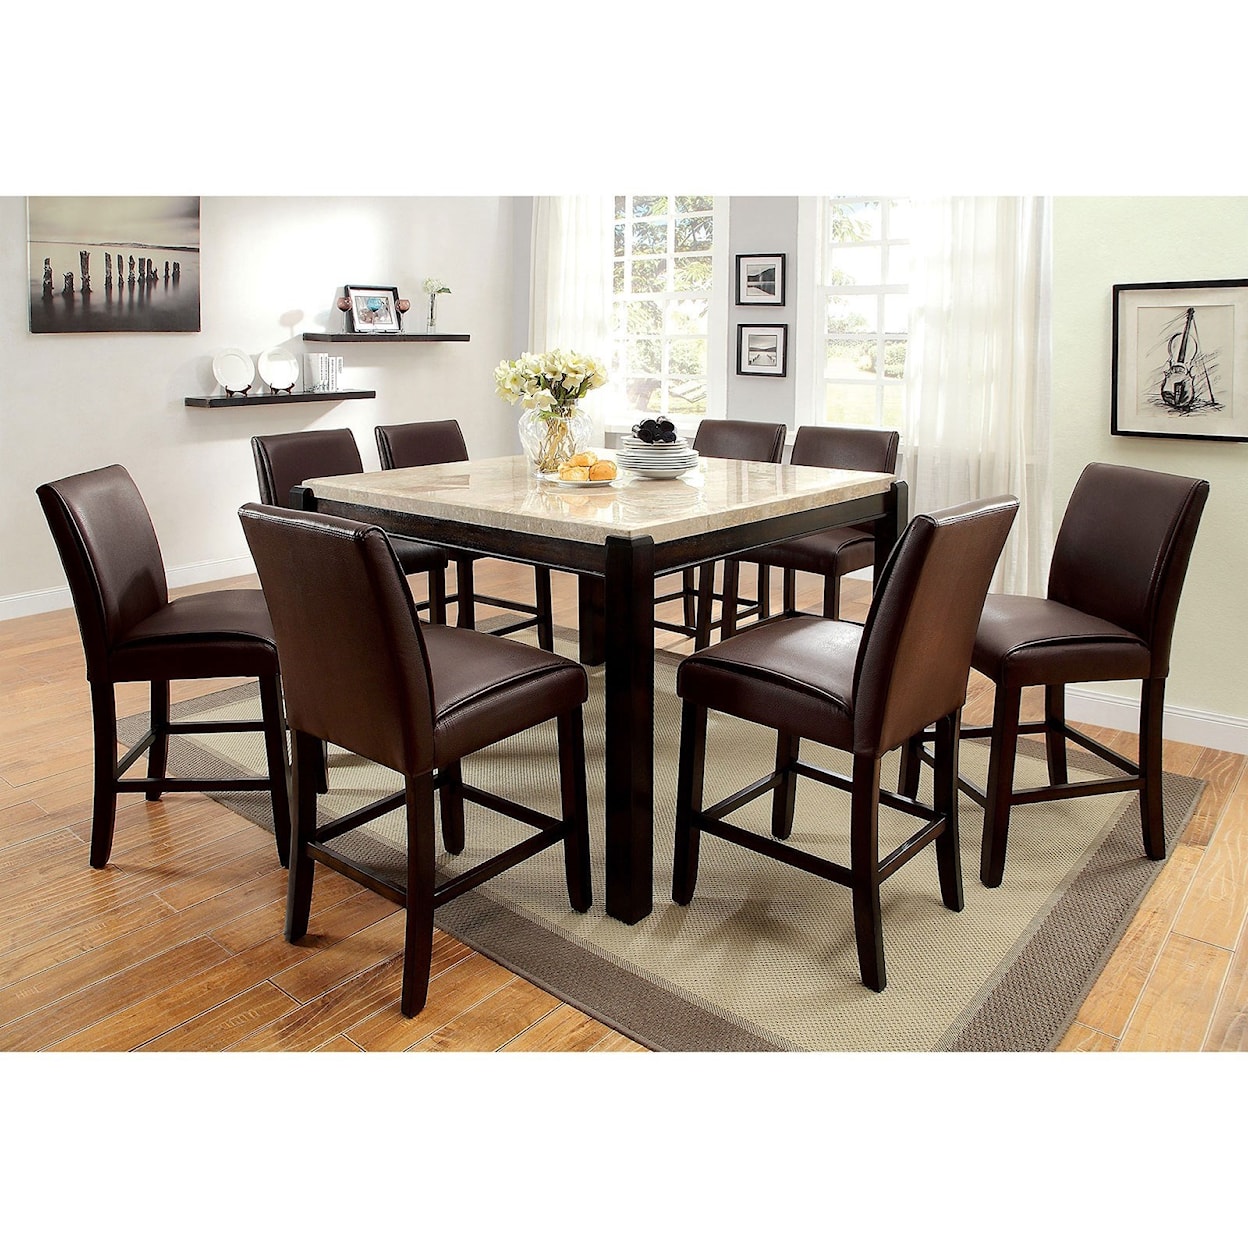 FUSA Grandstone II Counter Height Dining Table